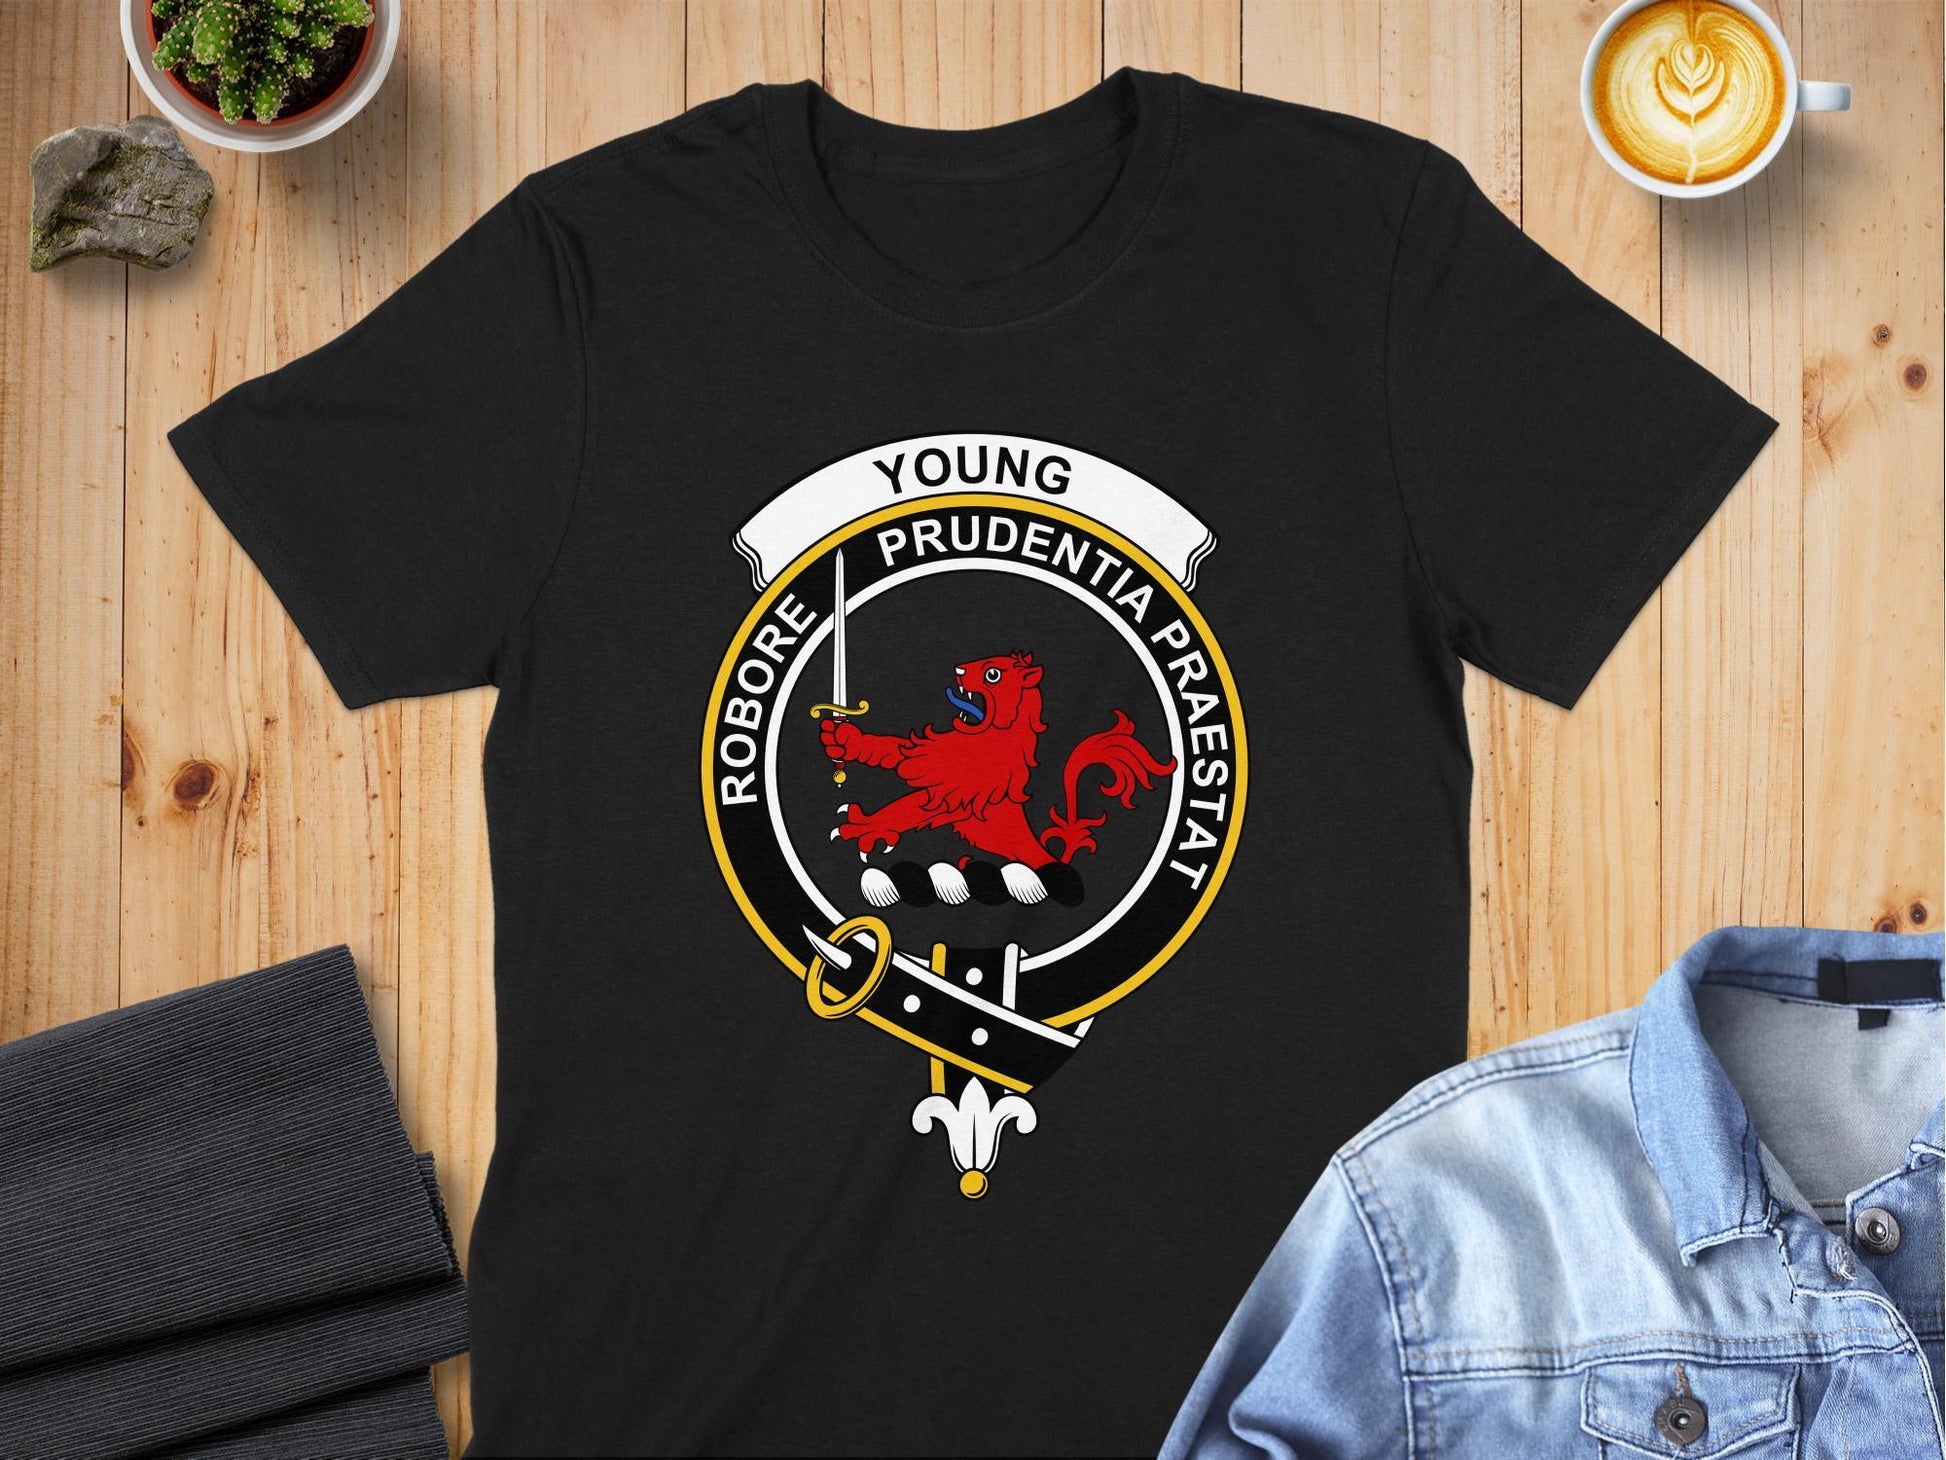 Classic Scottish Clan Crest Design Young T-Shirt - Living Stone Gifts